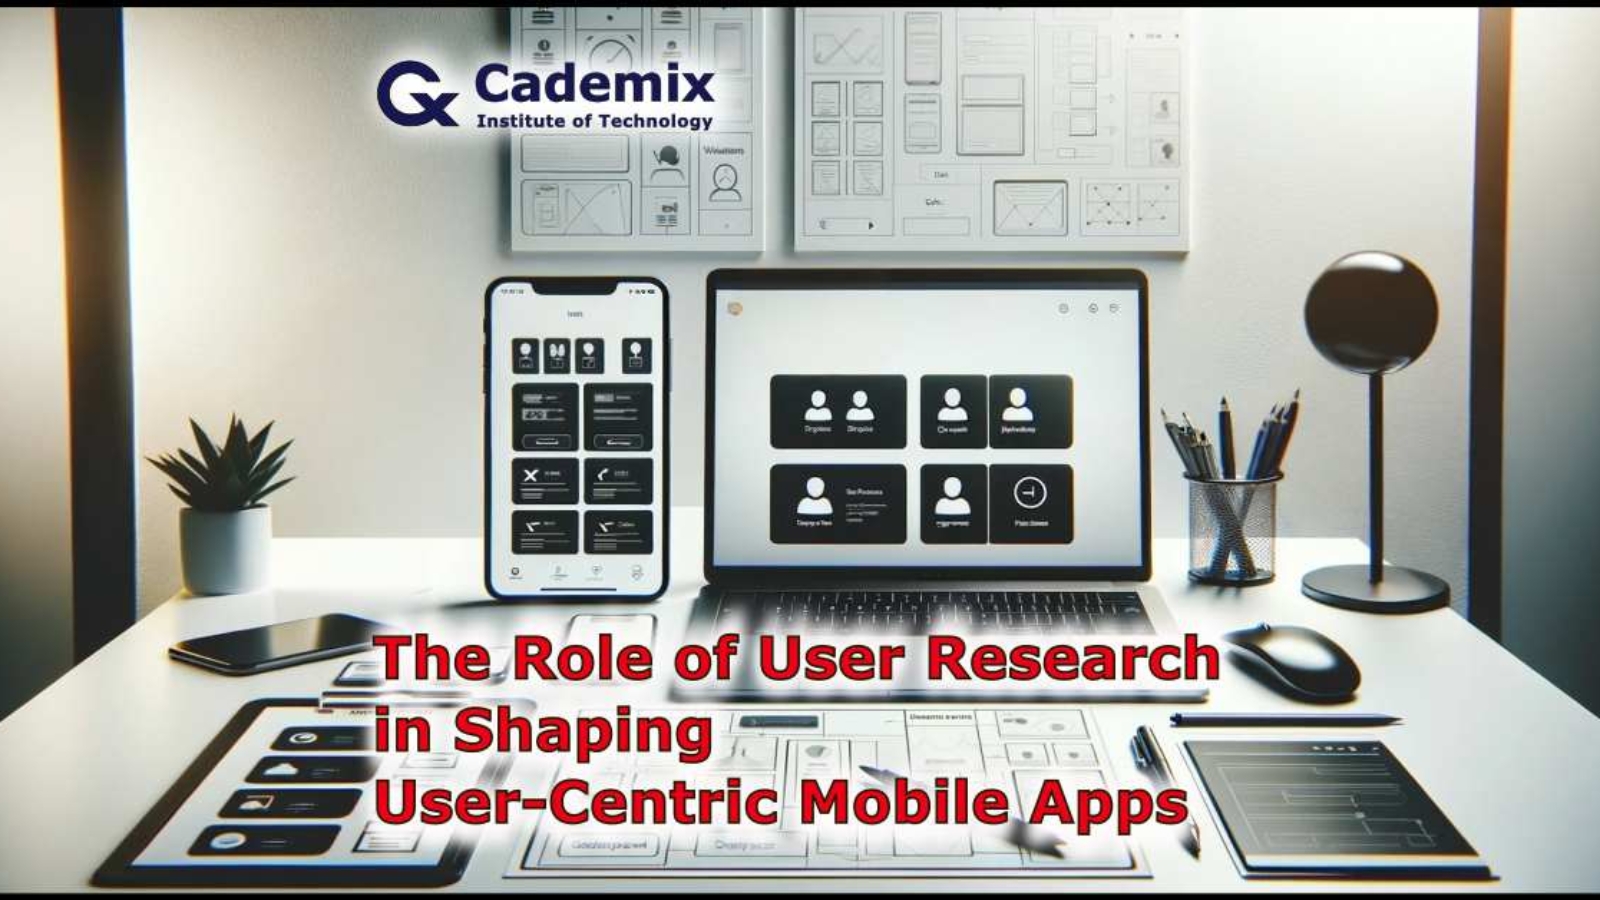 This image depicting a contemporary UX design workspace tailored to usability testing for mobile apps. Samareh Ghaem Maghami, Cademix Magazine.